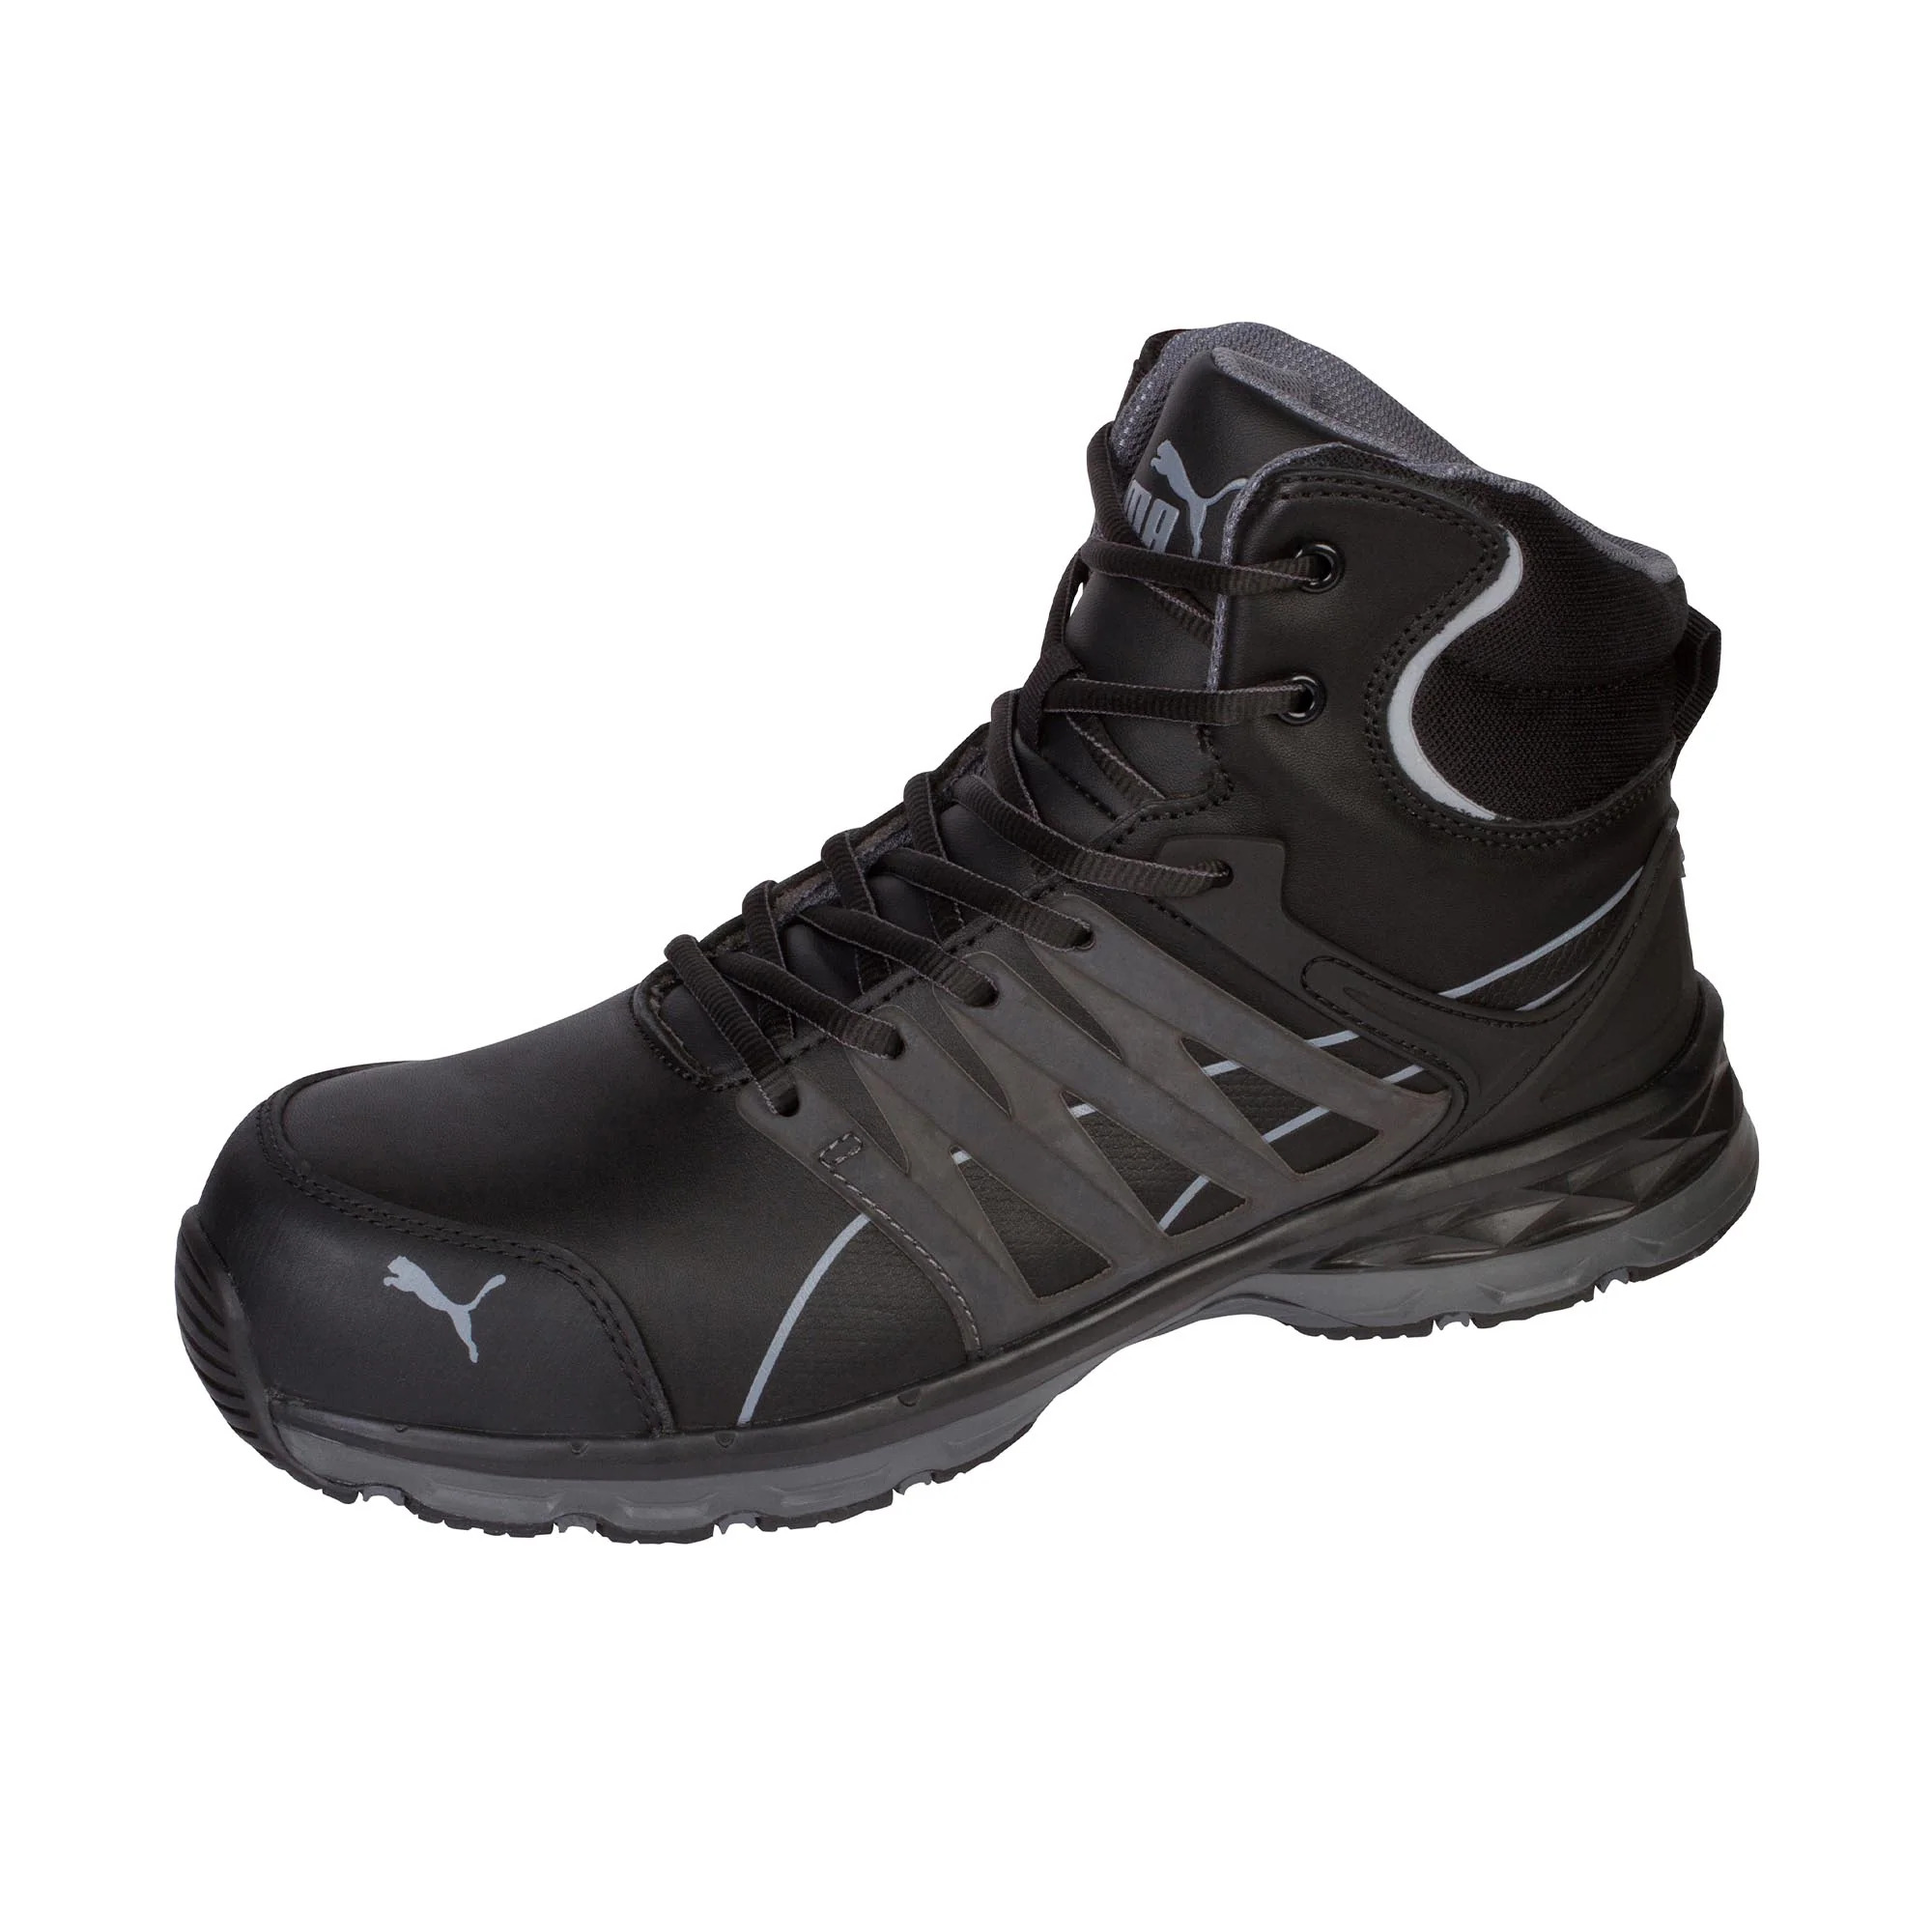 Puma Safety  Mens Velocity 2.0 Mid Slip Resistant Work  Work Safety Shoes Casual - image 5 of 5